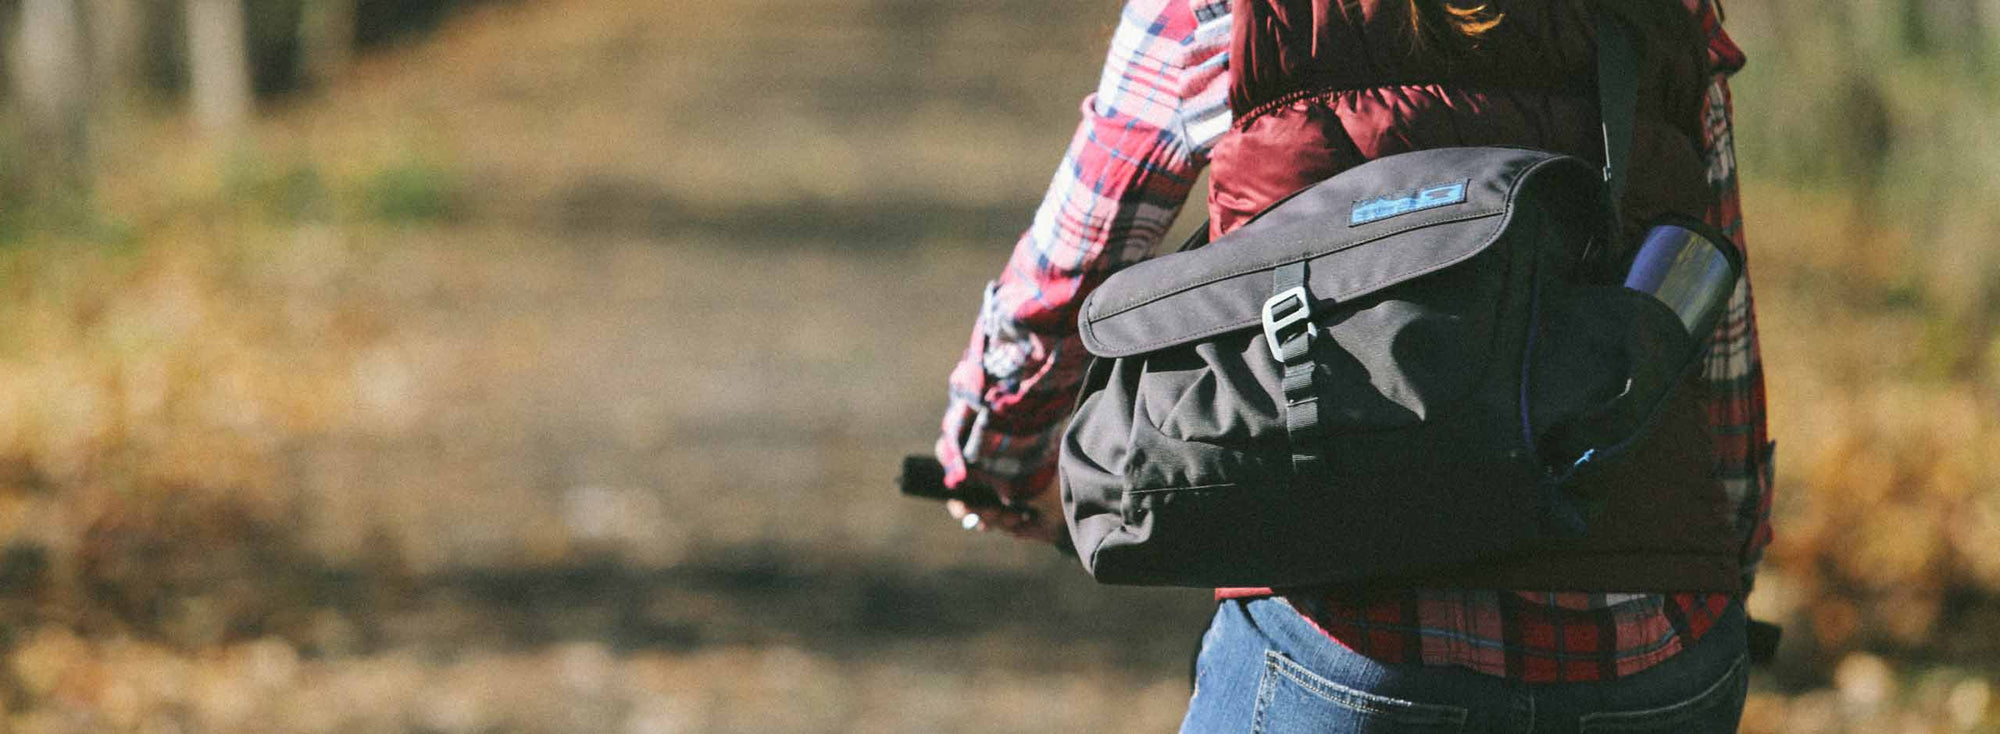 Messenger Bag vs Backpack - Which One Is Best For You 